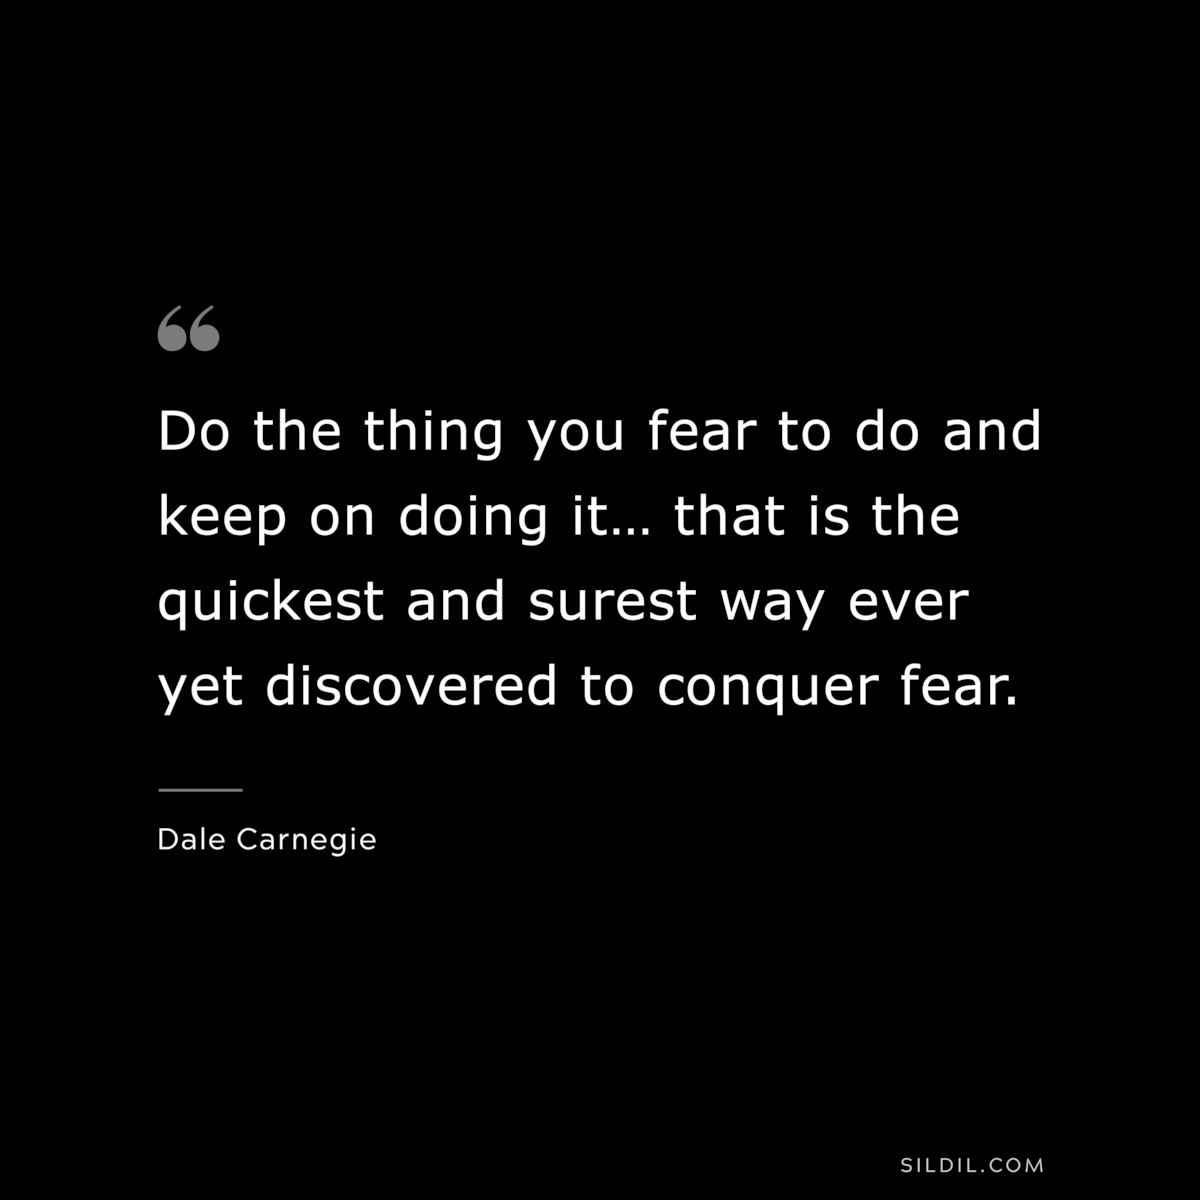 Do the thing you fear to do and keep on doing it… that is the quickest and surest way ever yet discovered to conquer fear.― Dale Carnegie